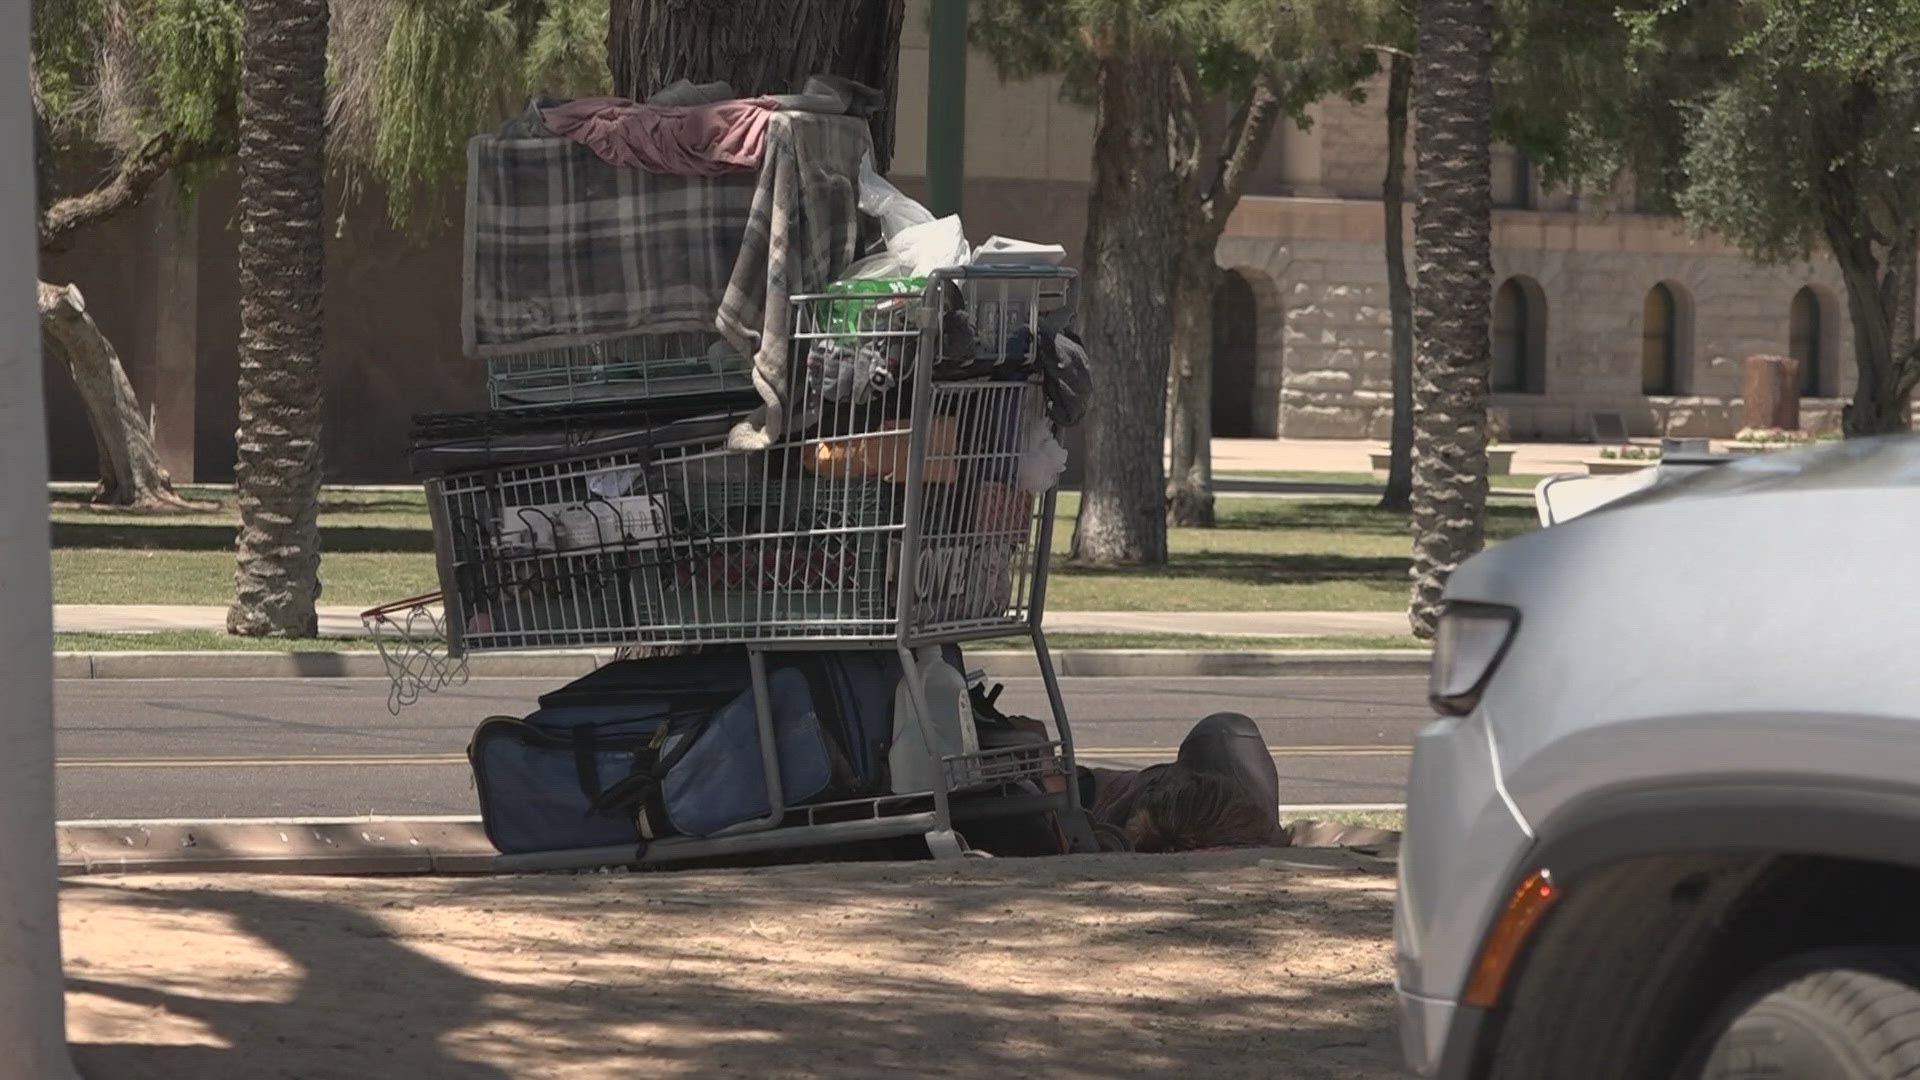 The debate over addressing homelessness is complicated, but it boils down to some lawmakers wanting to focus on housing and others wanting to prioritize treatment.